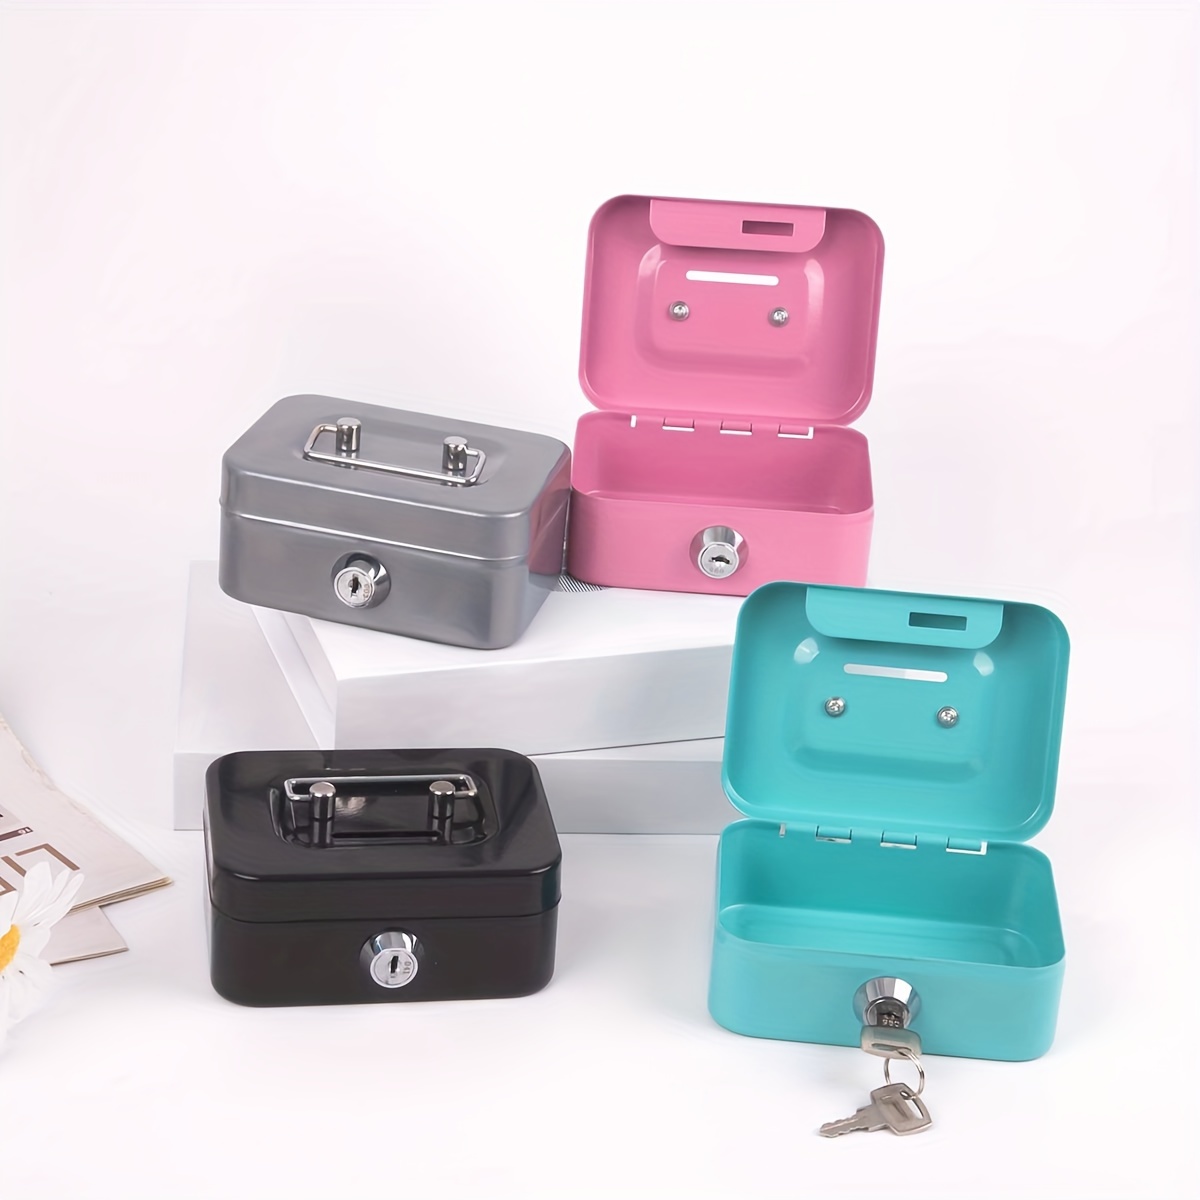 

1 Creative Portable Piggy Bank With Key Storage Box For Coins With Lock And Coin Storage Box